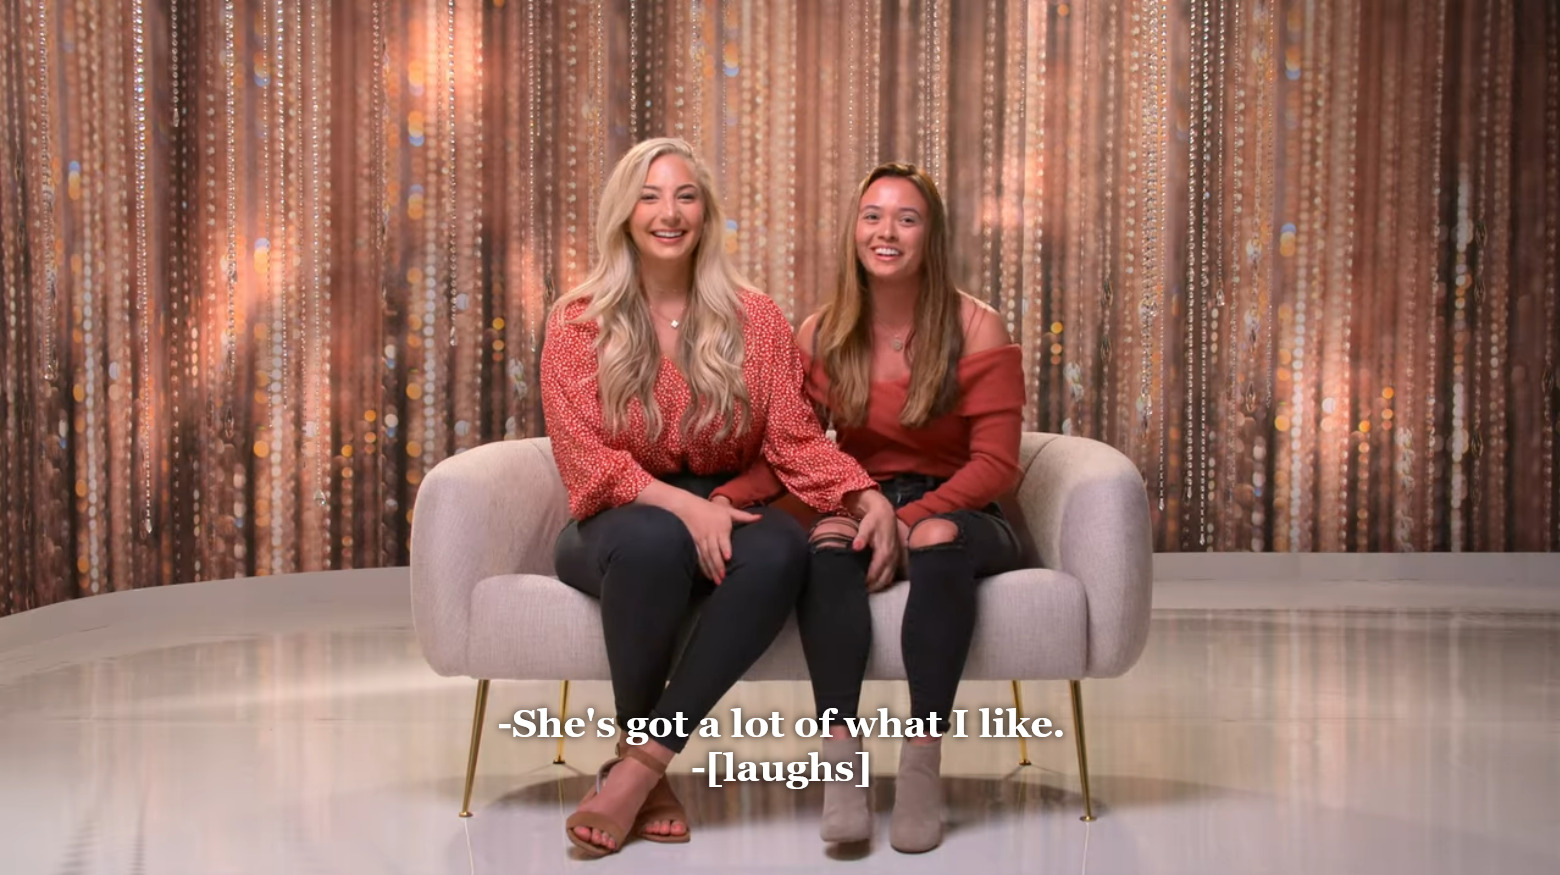 Lexi on left and Rae on right sitting at the confessional couch. Rae says "She's got a lot of what I like," referring to Lexi's bra size, and they laugh.